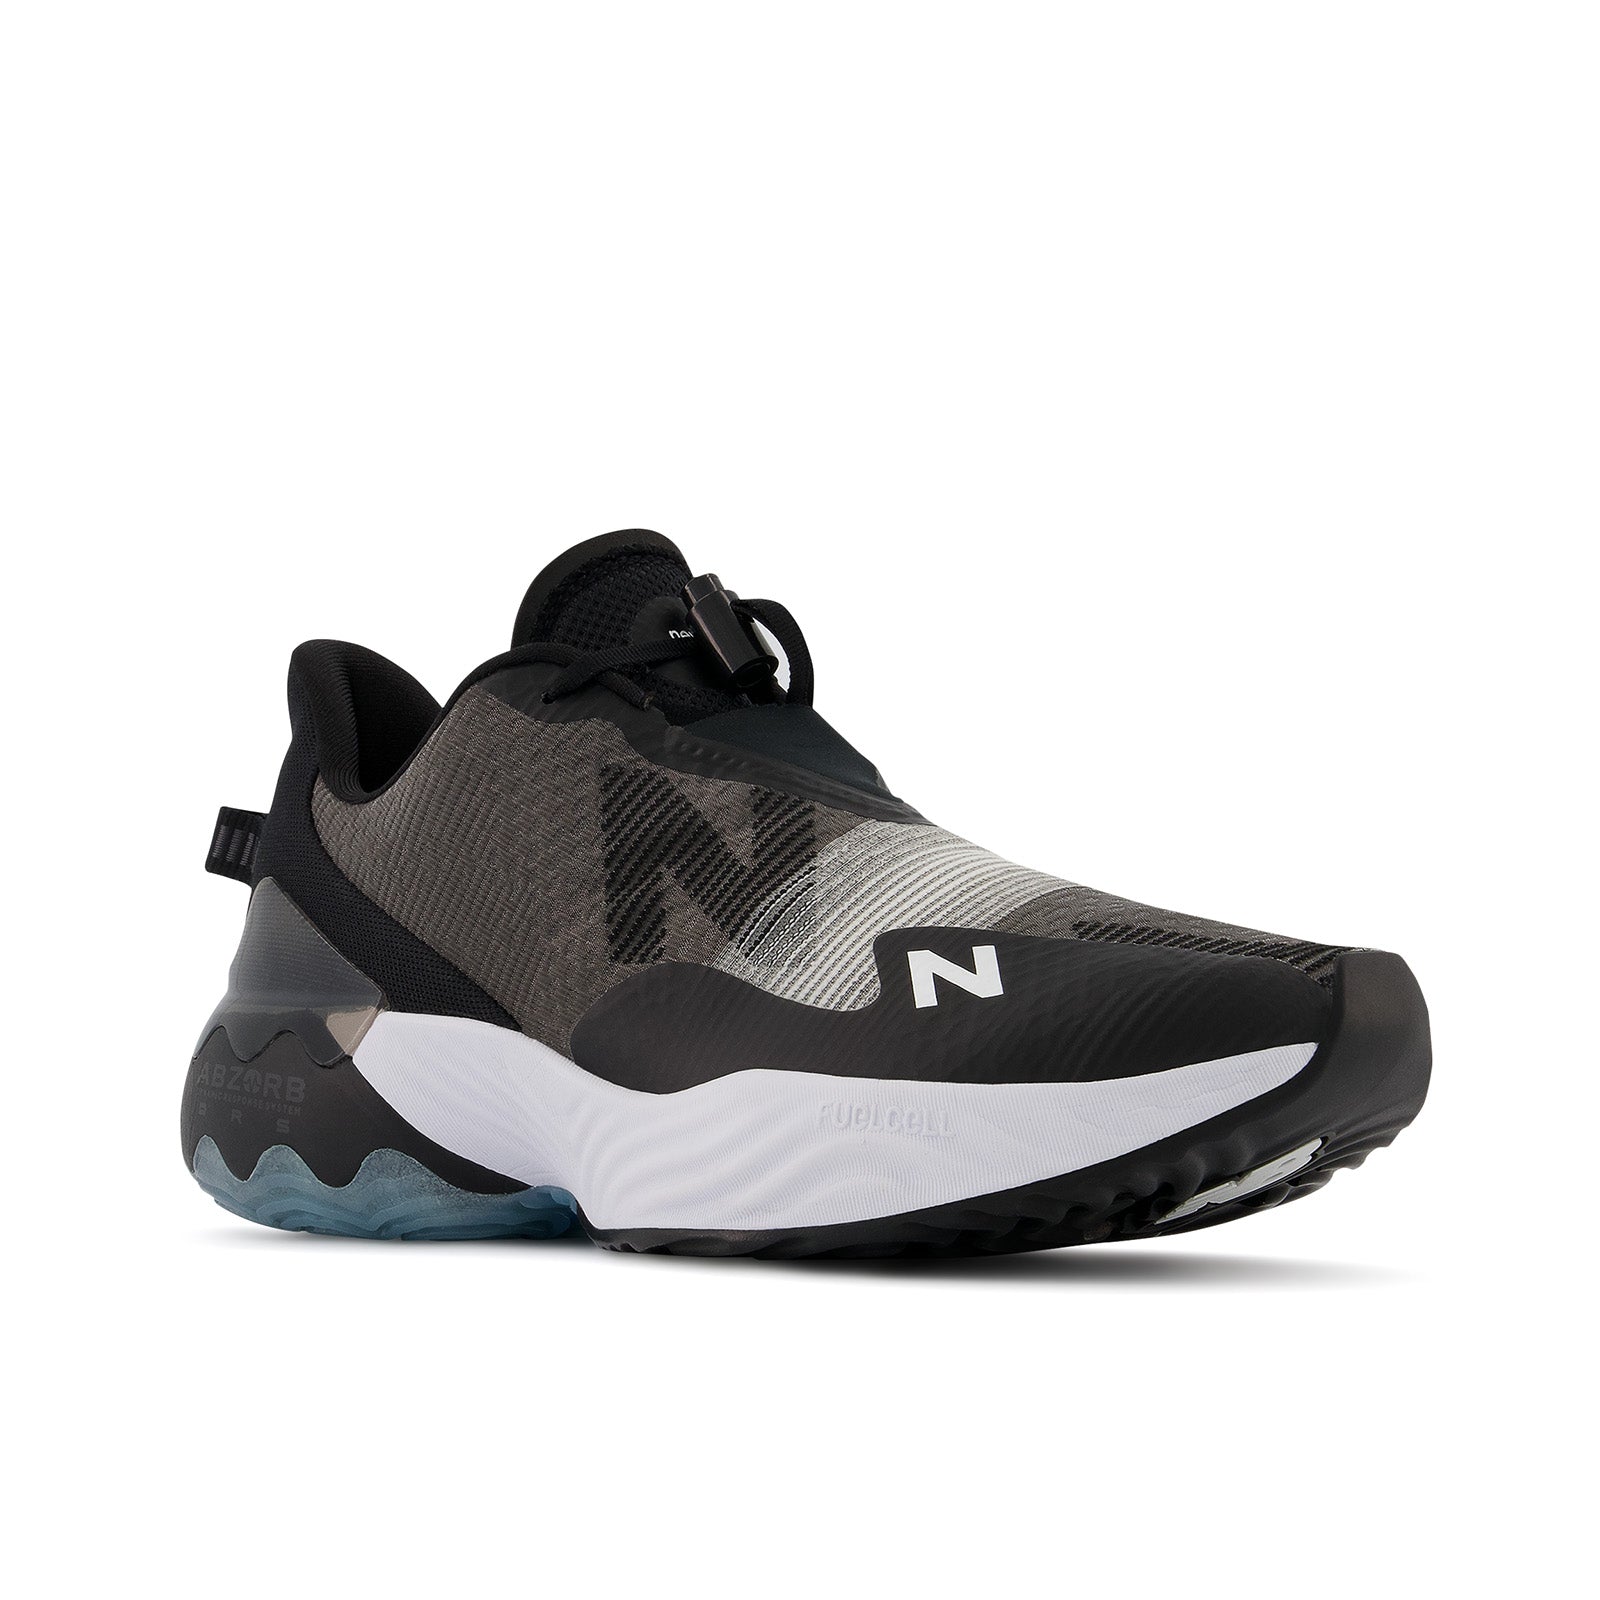 New Balance FuelCell Rebel TR